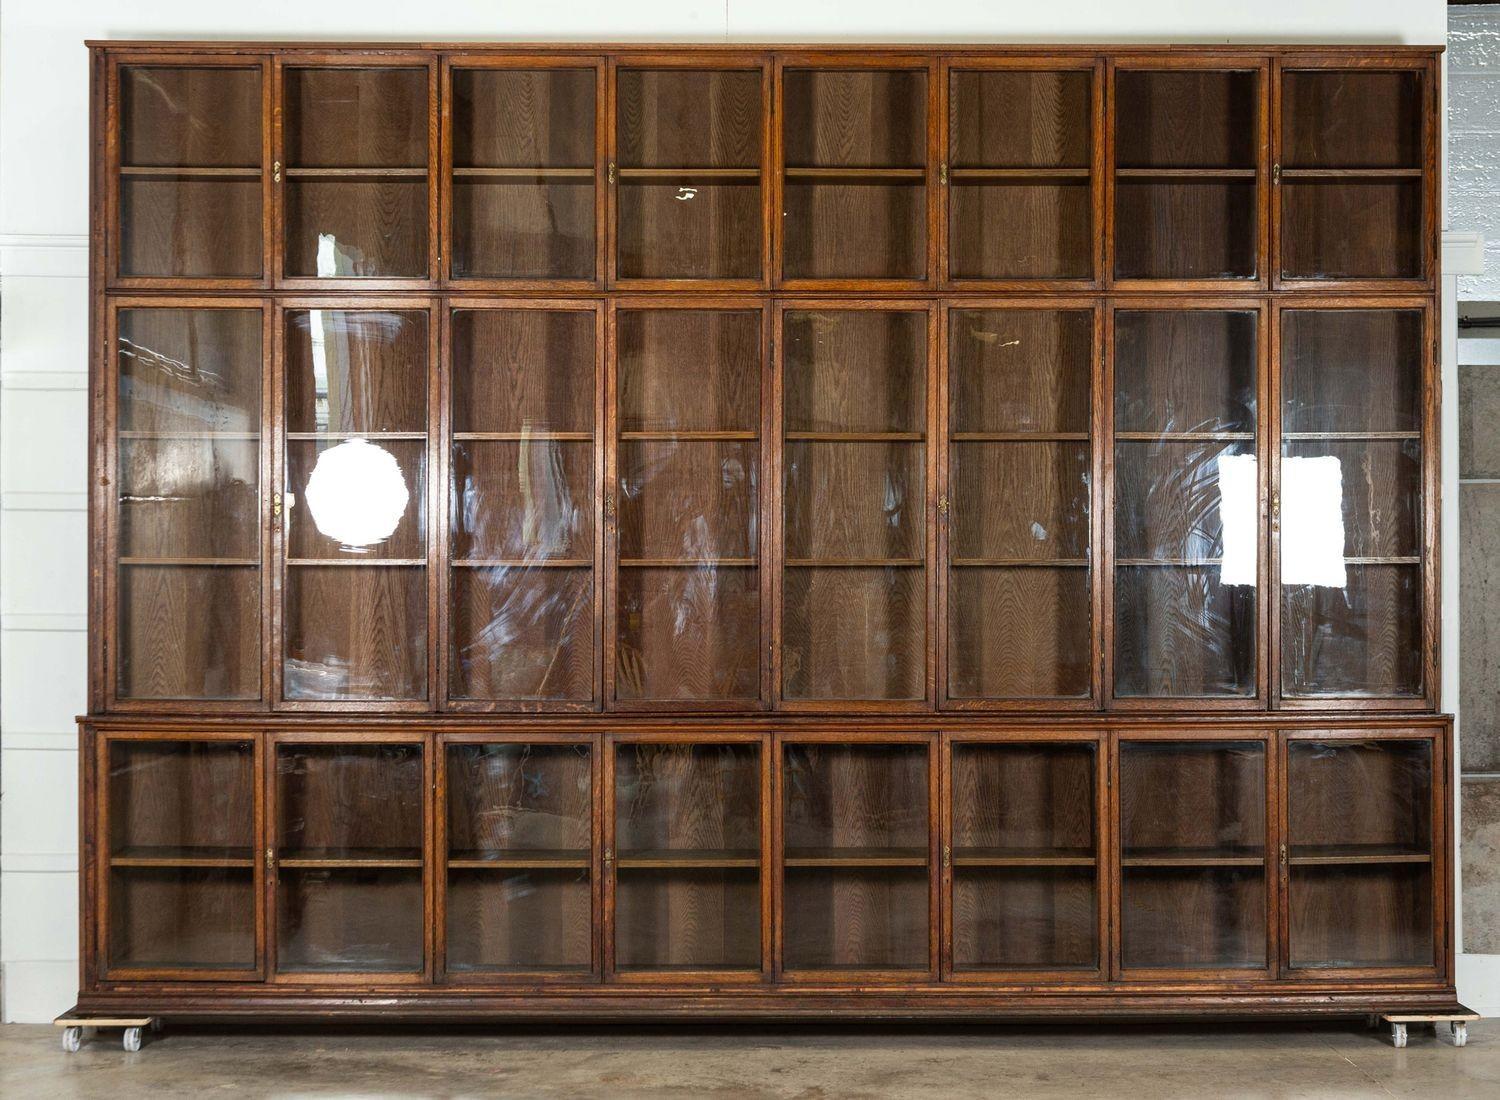 Monumental Oak Glazed Haberdashery Bookcase Cabinet In Good Condition For Sale In Staffordshire, GB